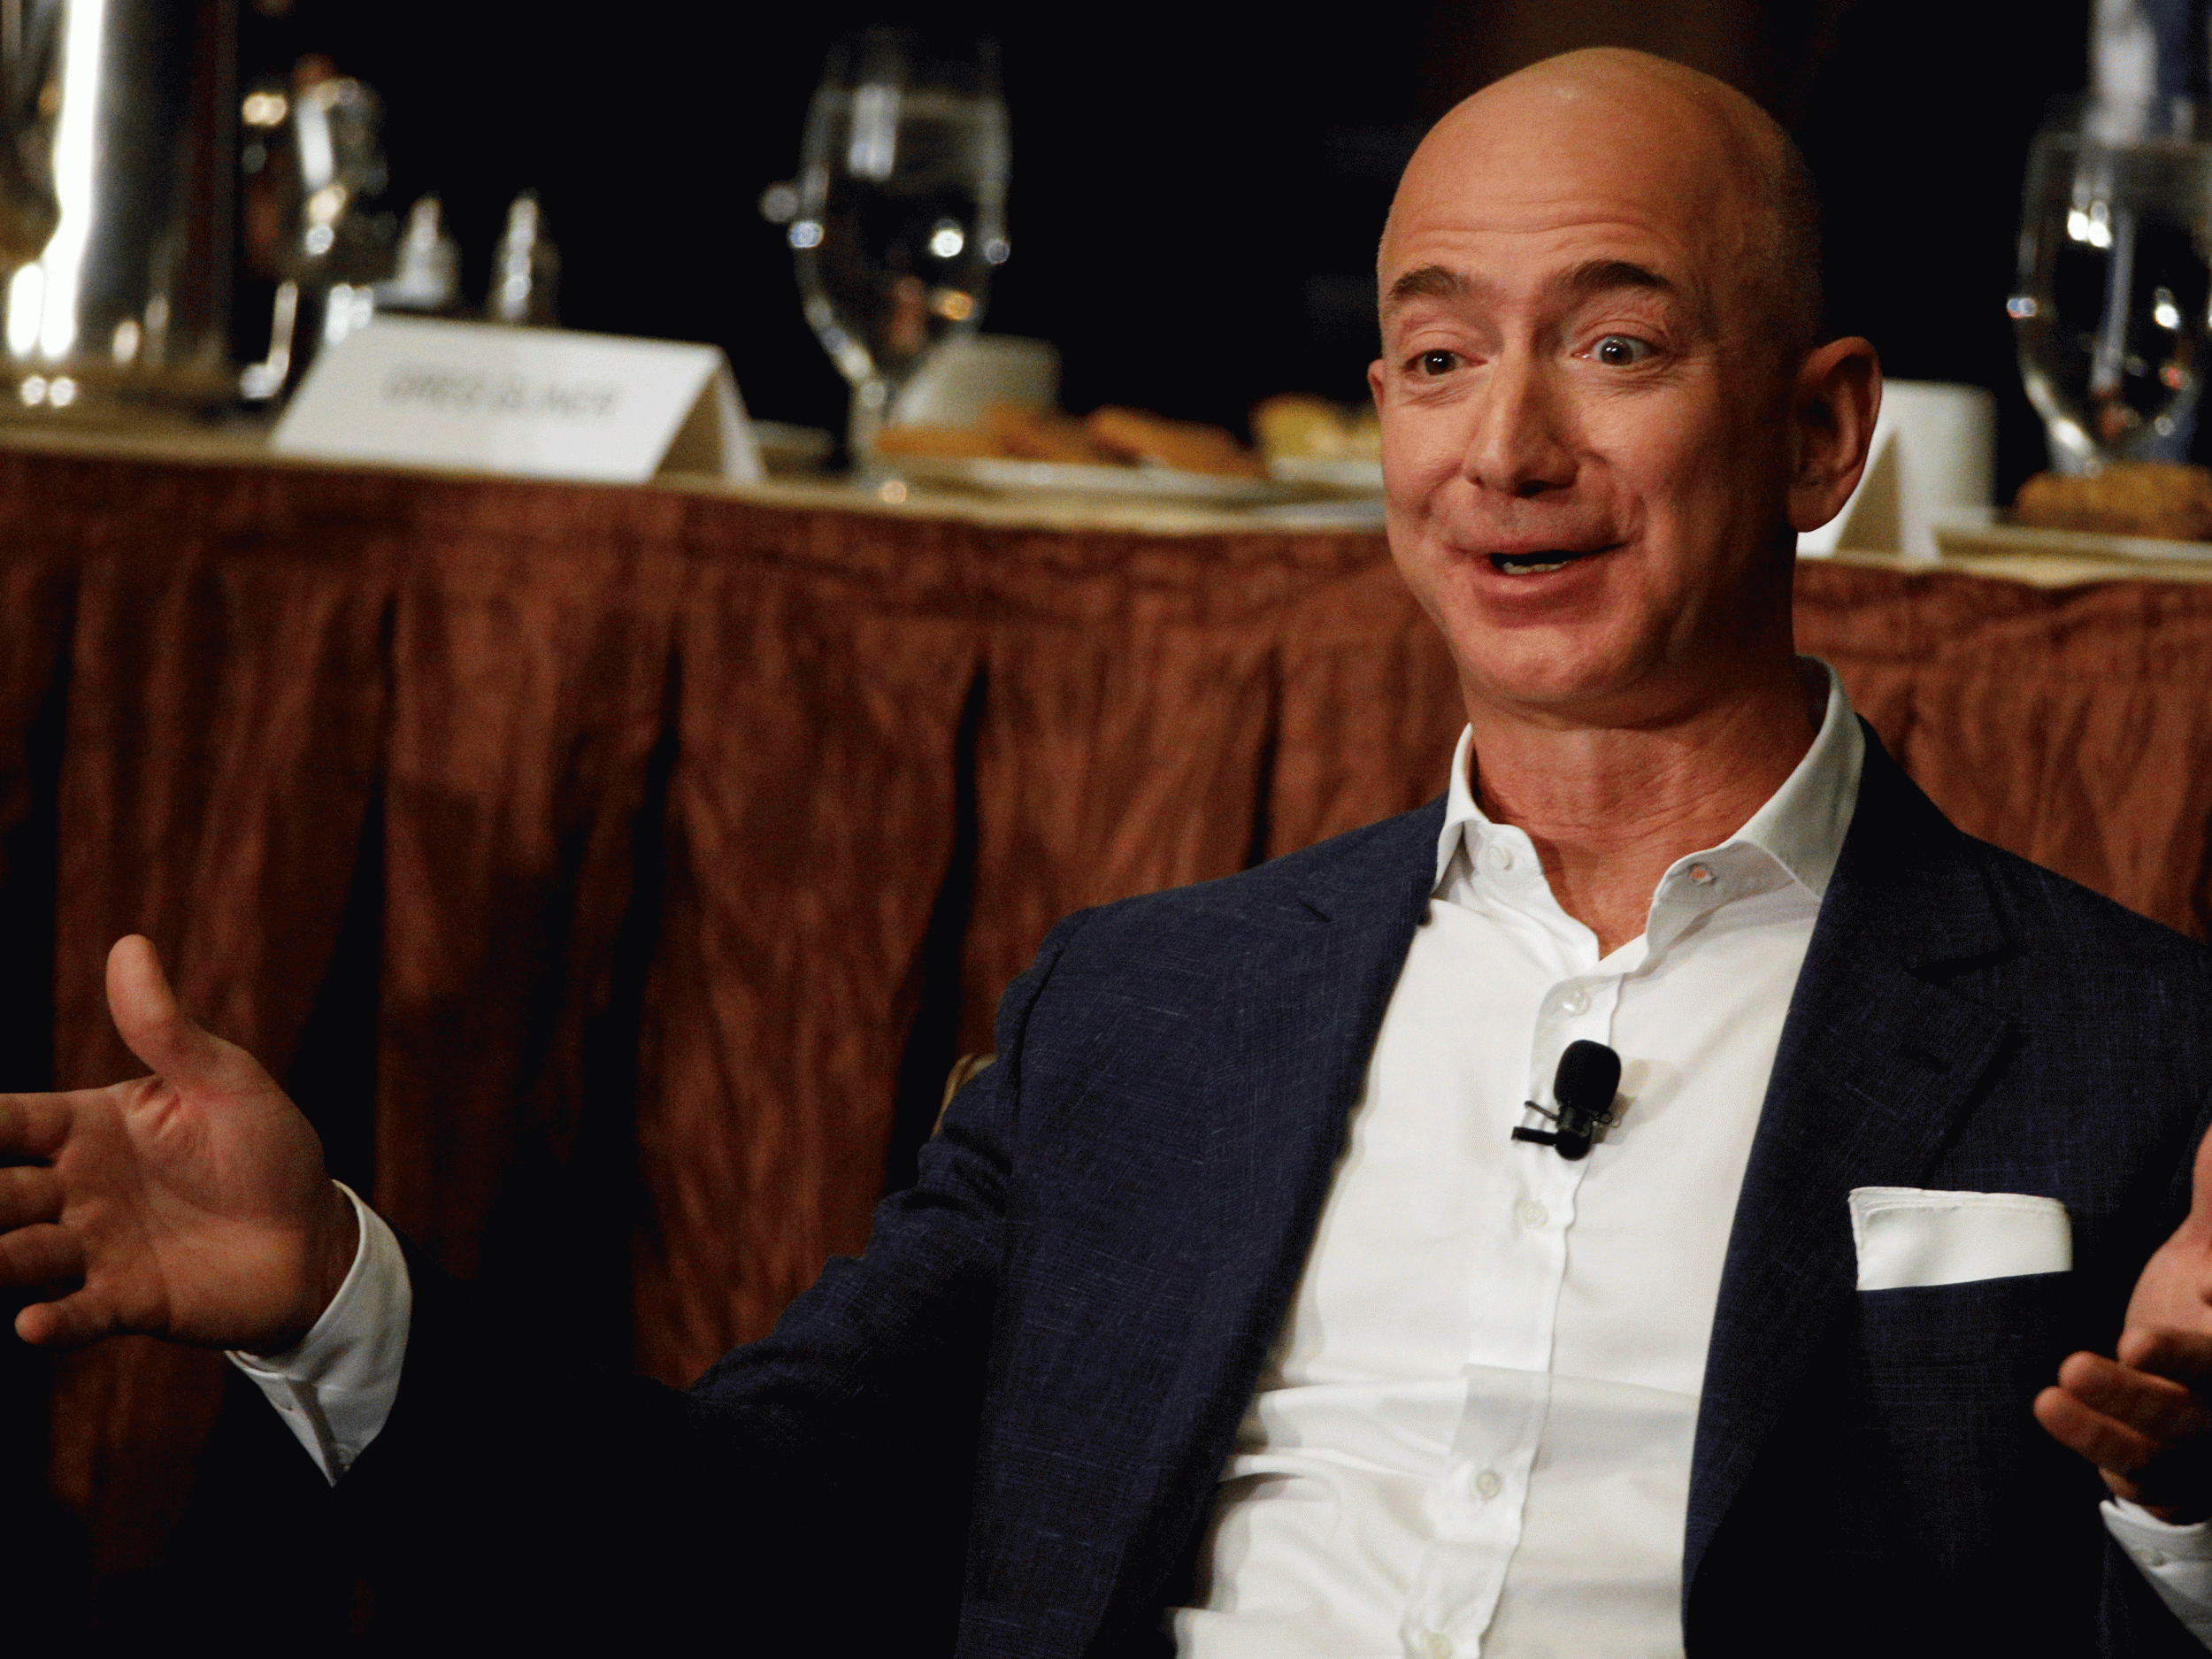 Amazon founder Mr Bezos saw his fortune surge by $6.6bn in a day after Amazon reported its latest financial results